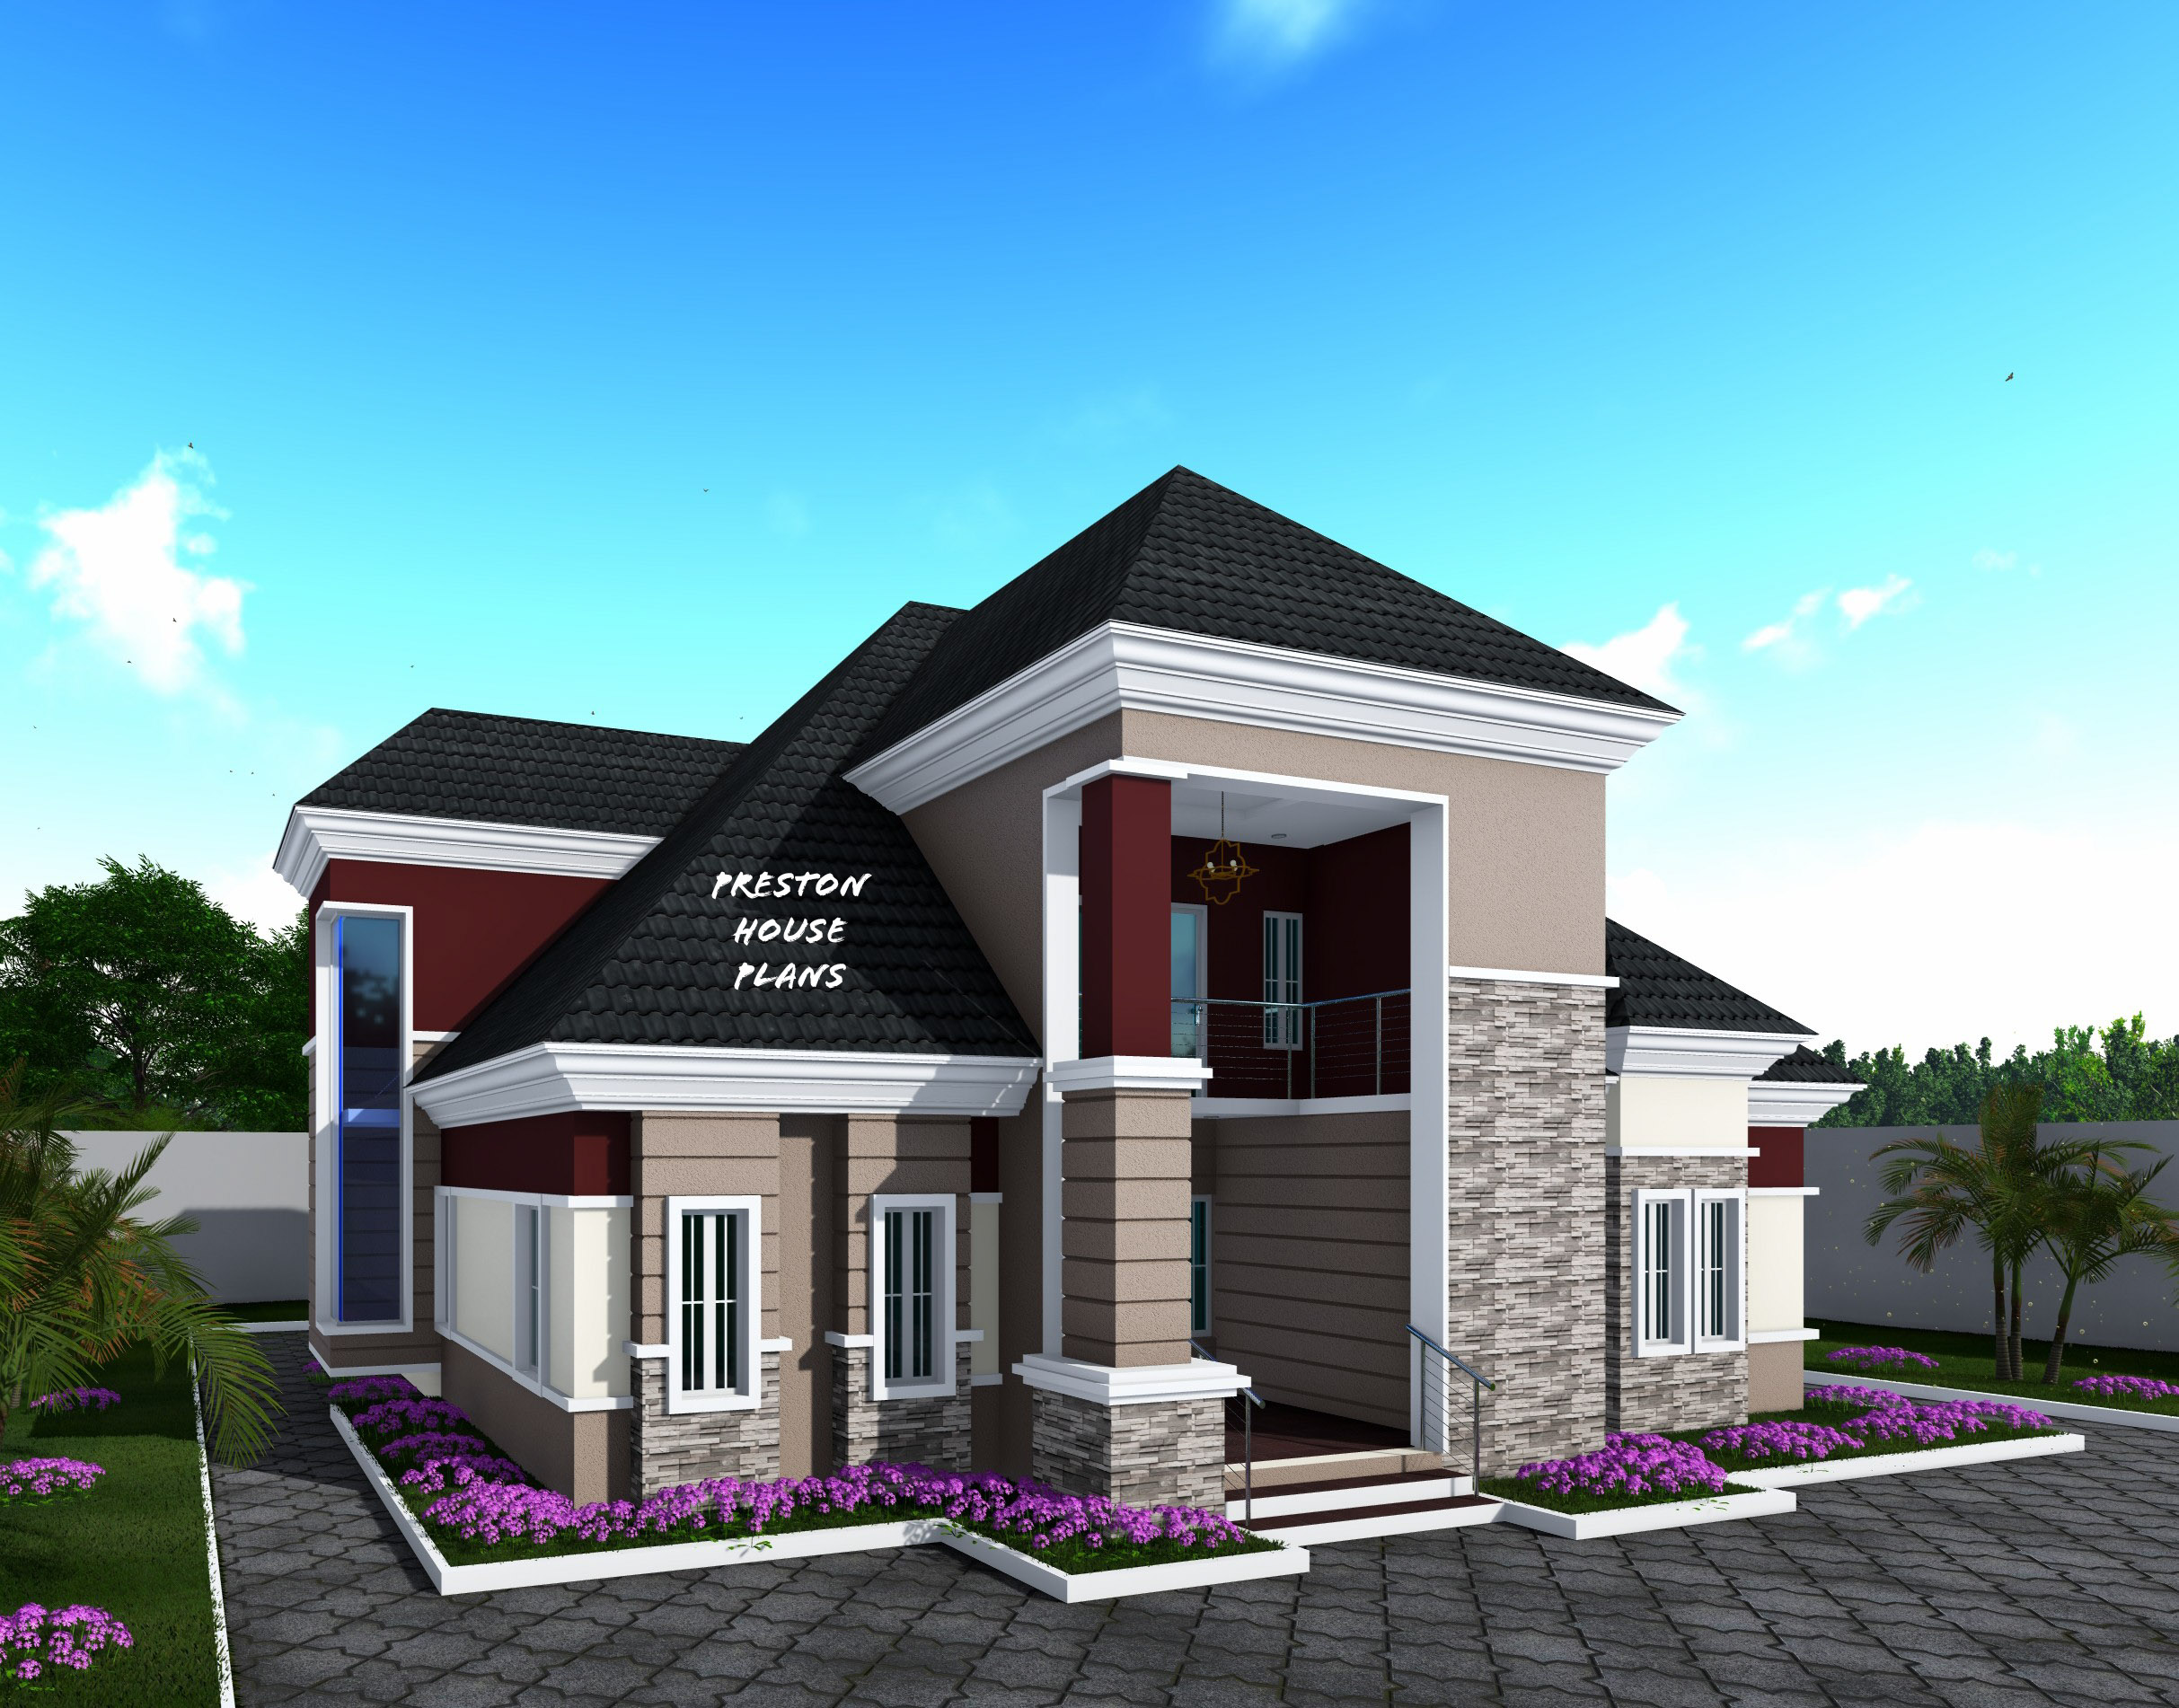 3 Bedroom Bungalow with a penthouse